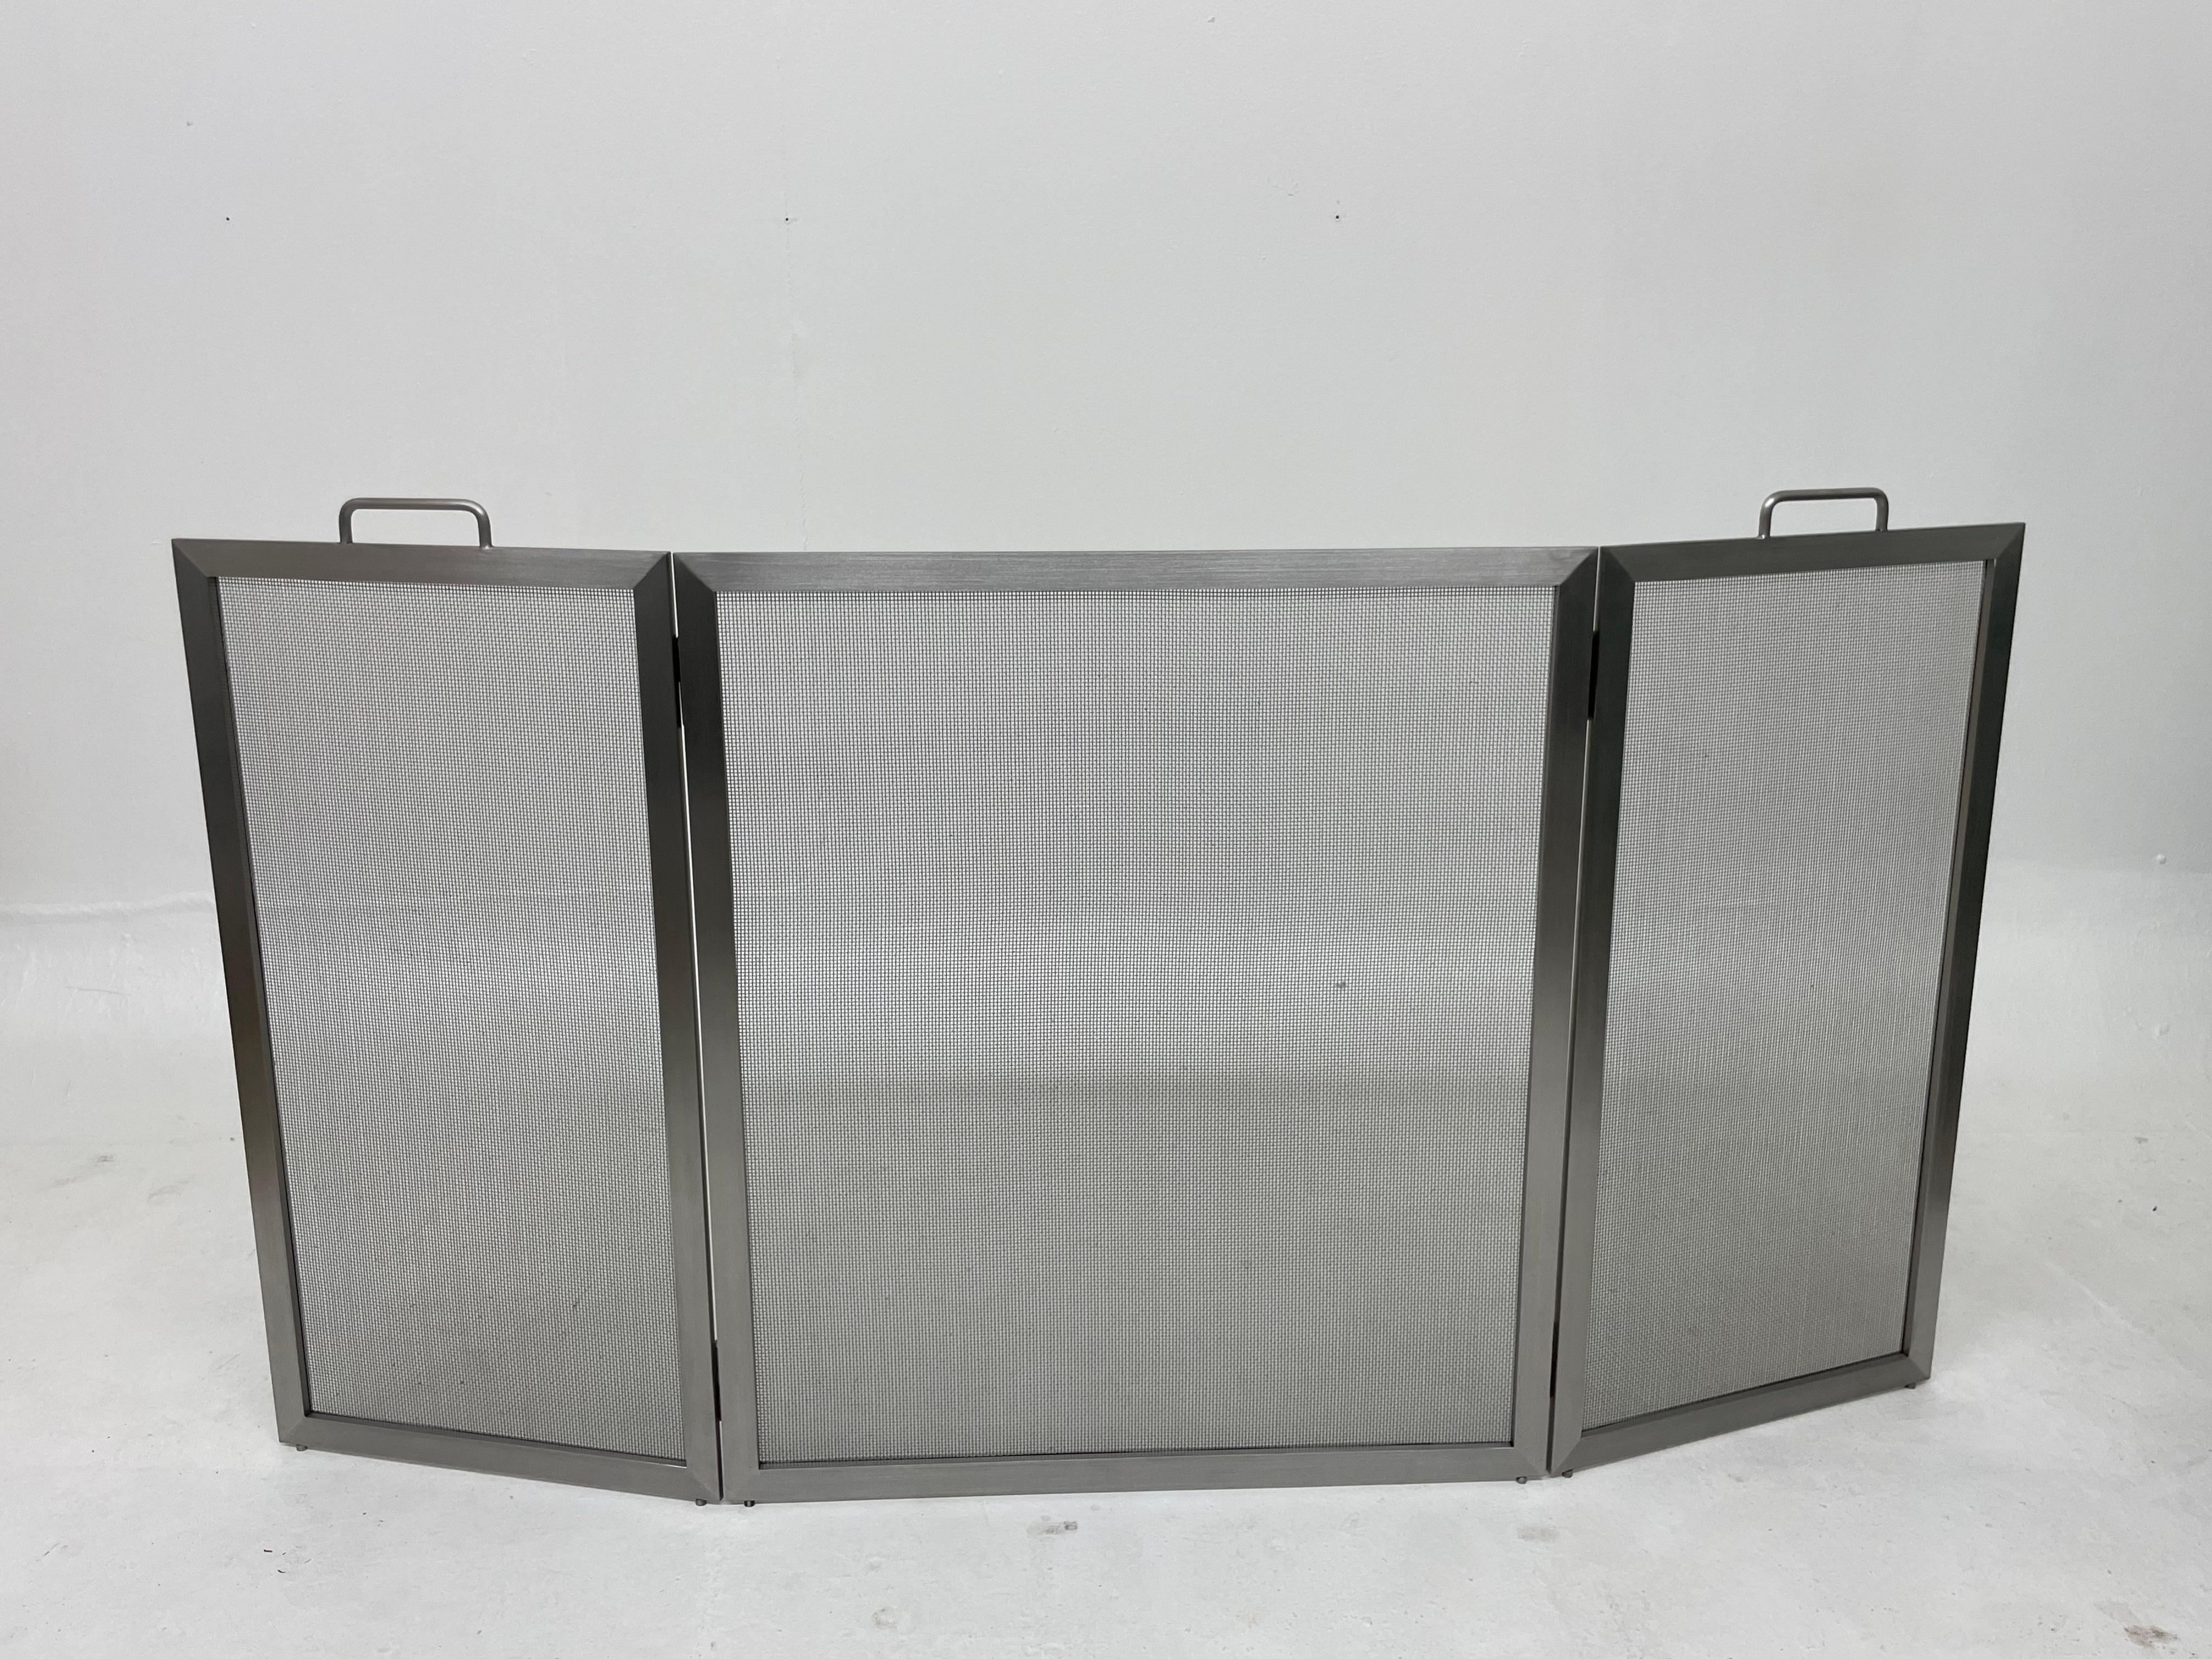 Hand fabricated stainless steel tri-fold fireplace screen with our standard #8 wire mesh backing and a brushed stainless finish. Dimensions are adjustable. Just let us know the space you are trying to fit and we will work from there. We look forward